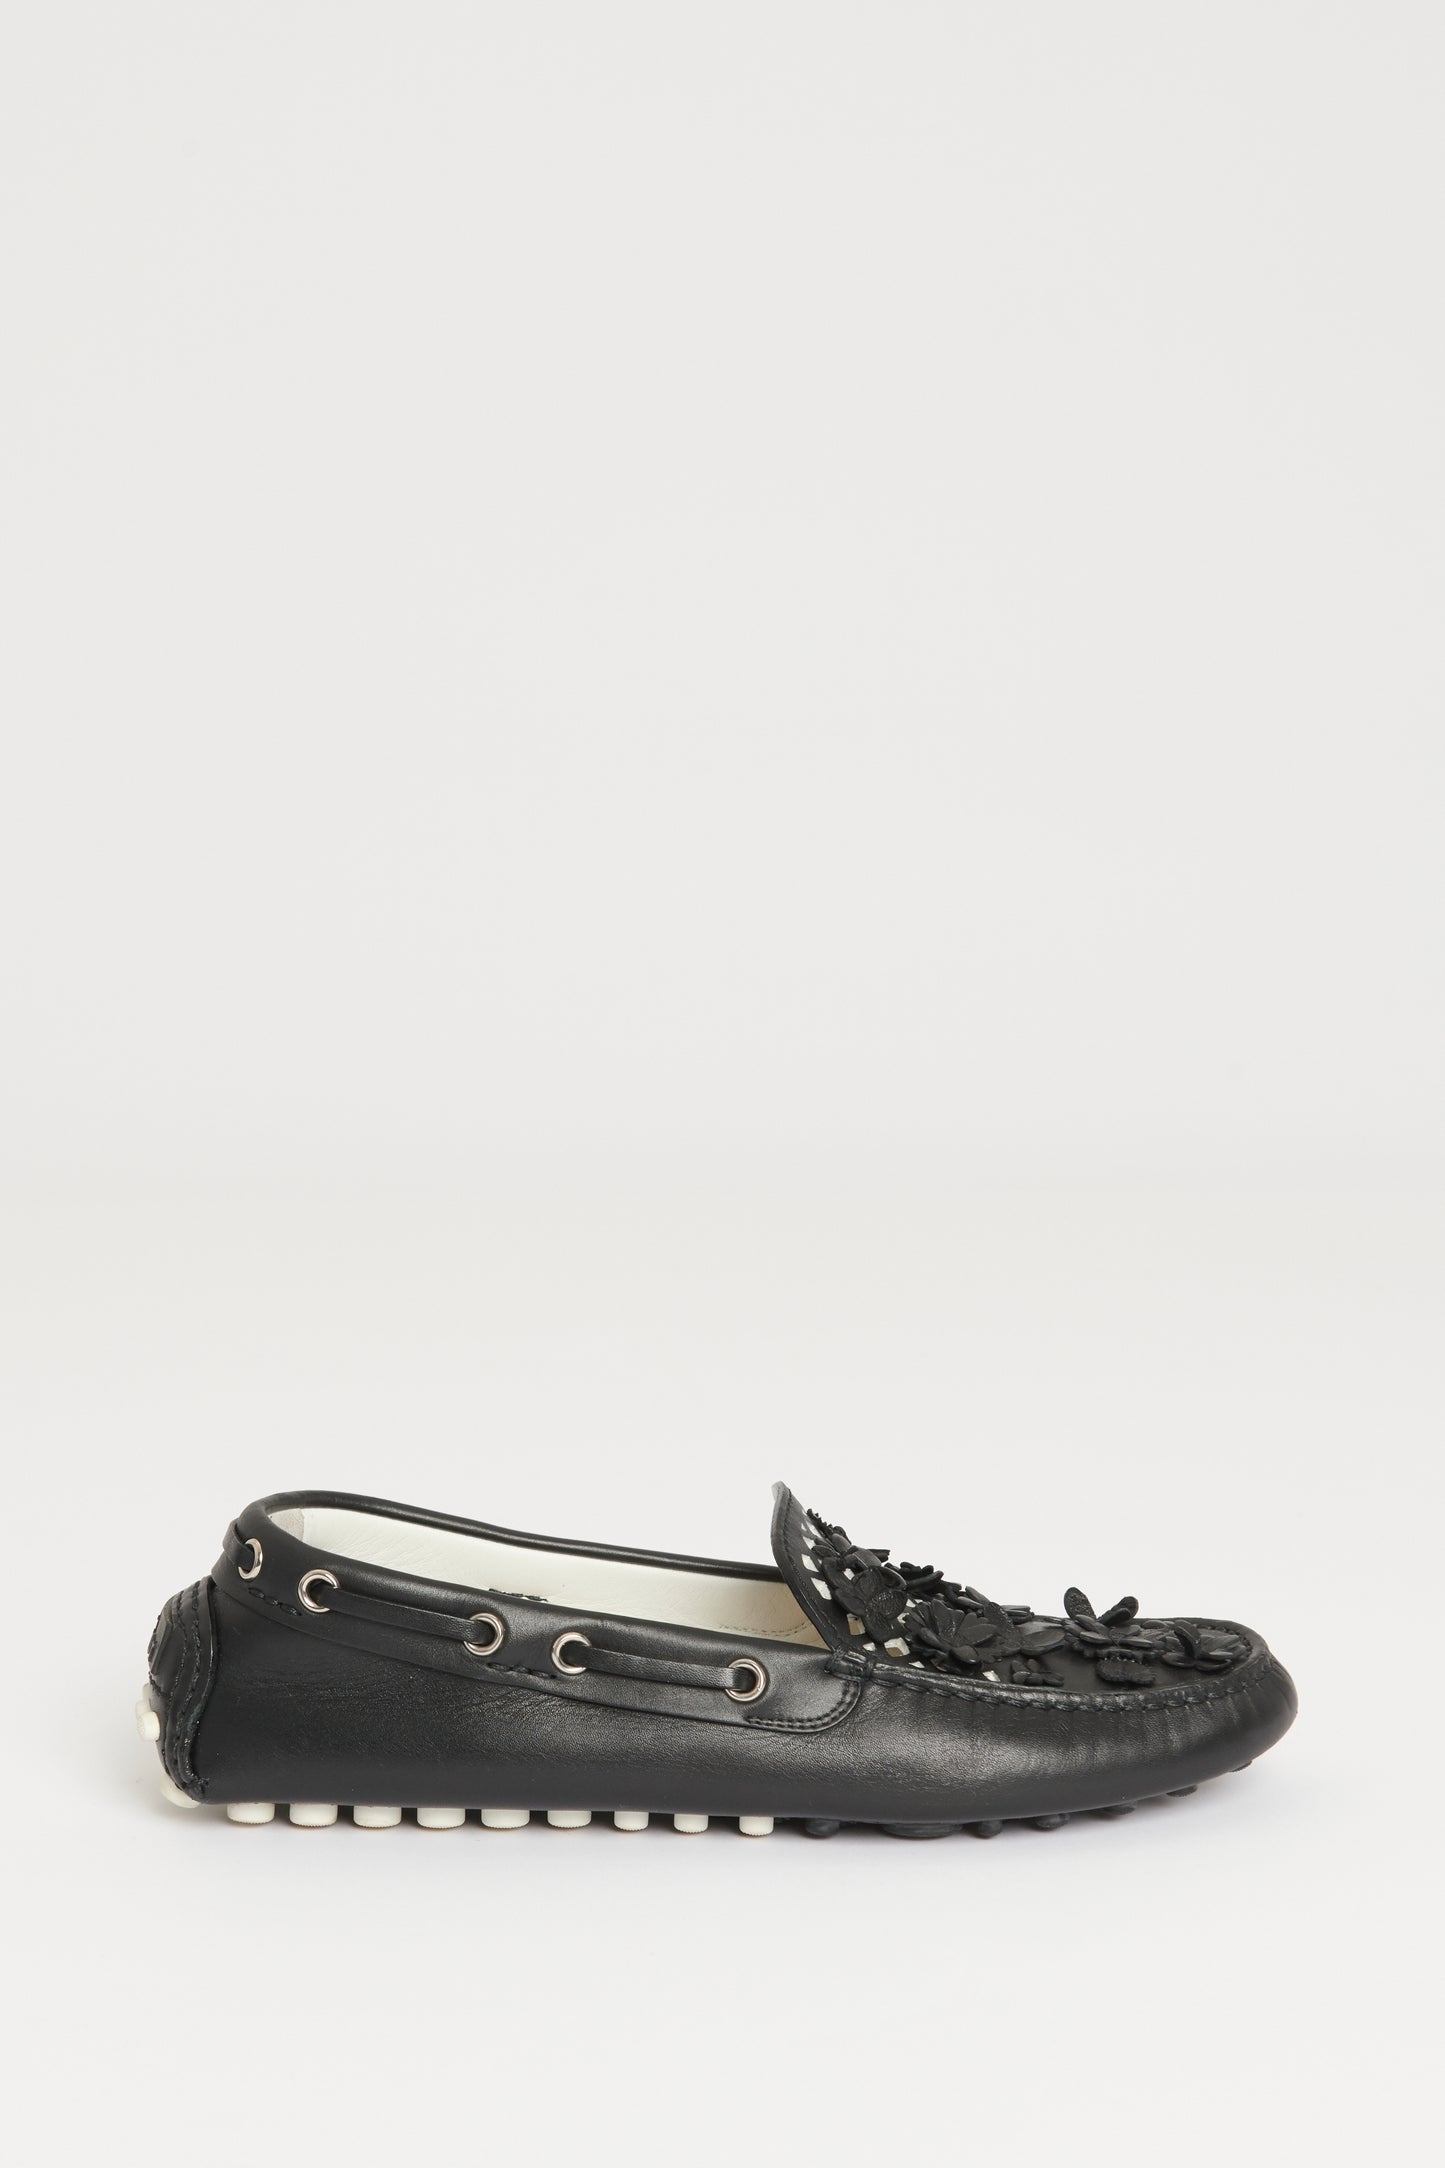 Black Leather Preowned Floral Appliqué Driving Loafers